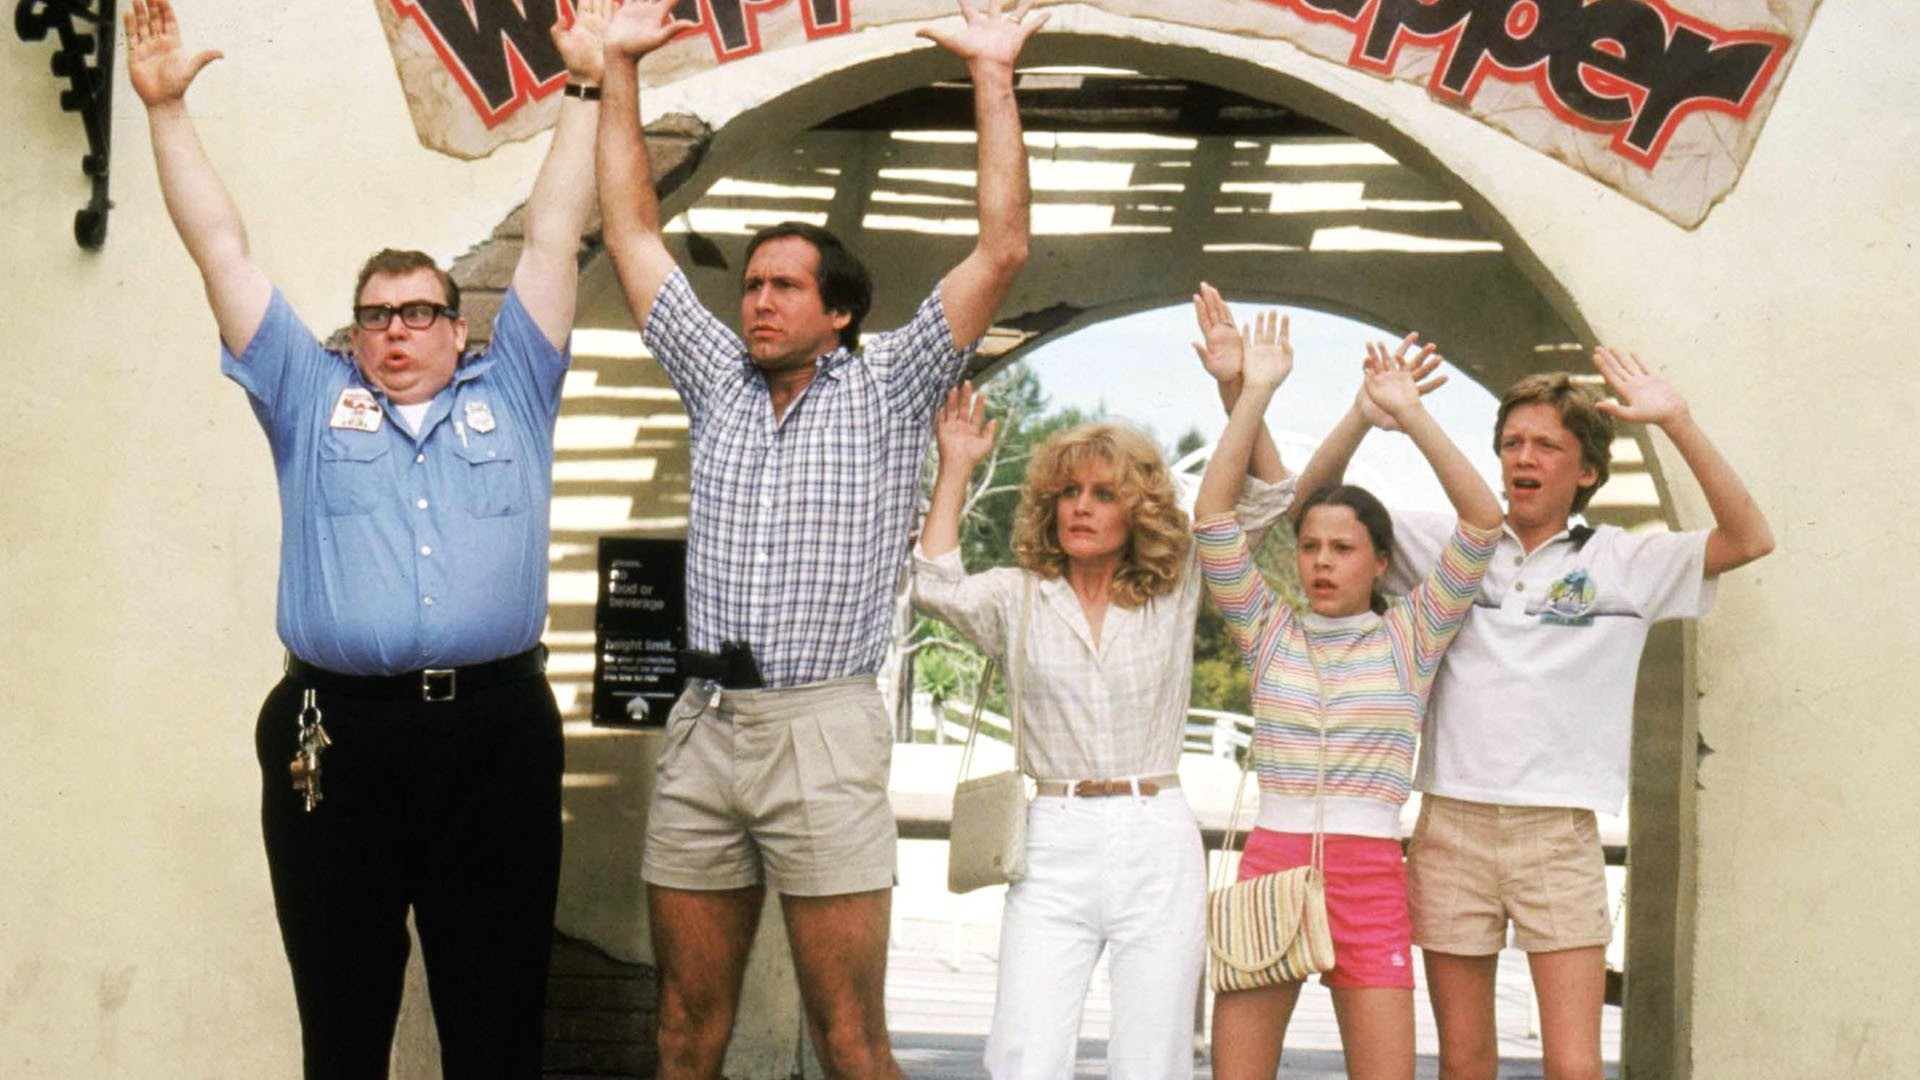 1920x1080 305 best V-A-C-A-T-I-O-N images on Pinterest | Chevy chase, National  lampoons vacation and National lampoons